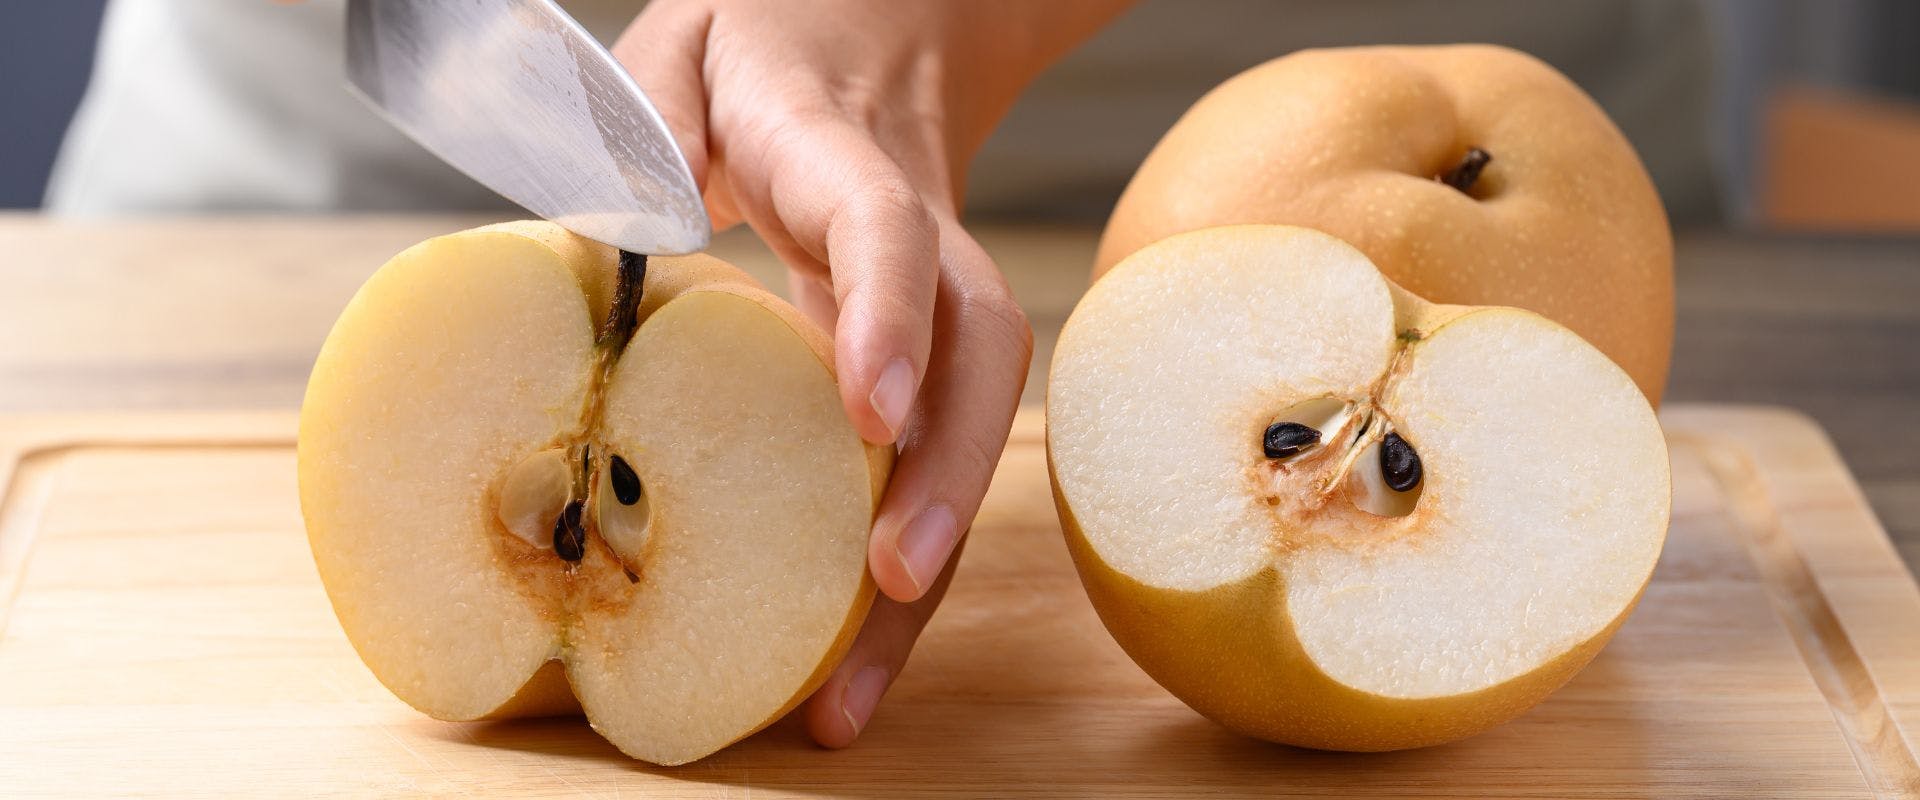 Asian pear being sliced on wooden board